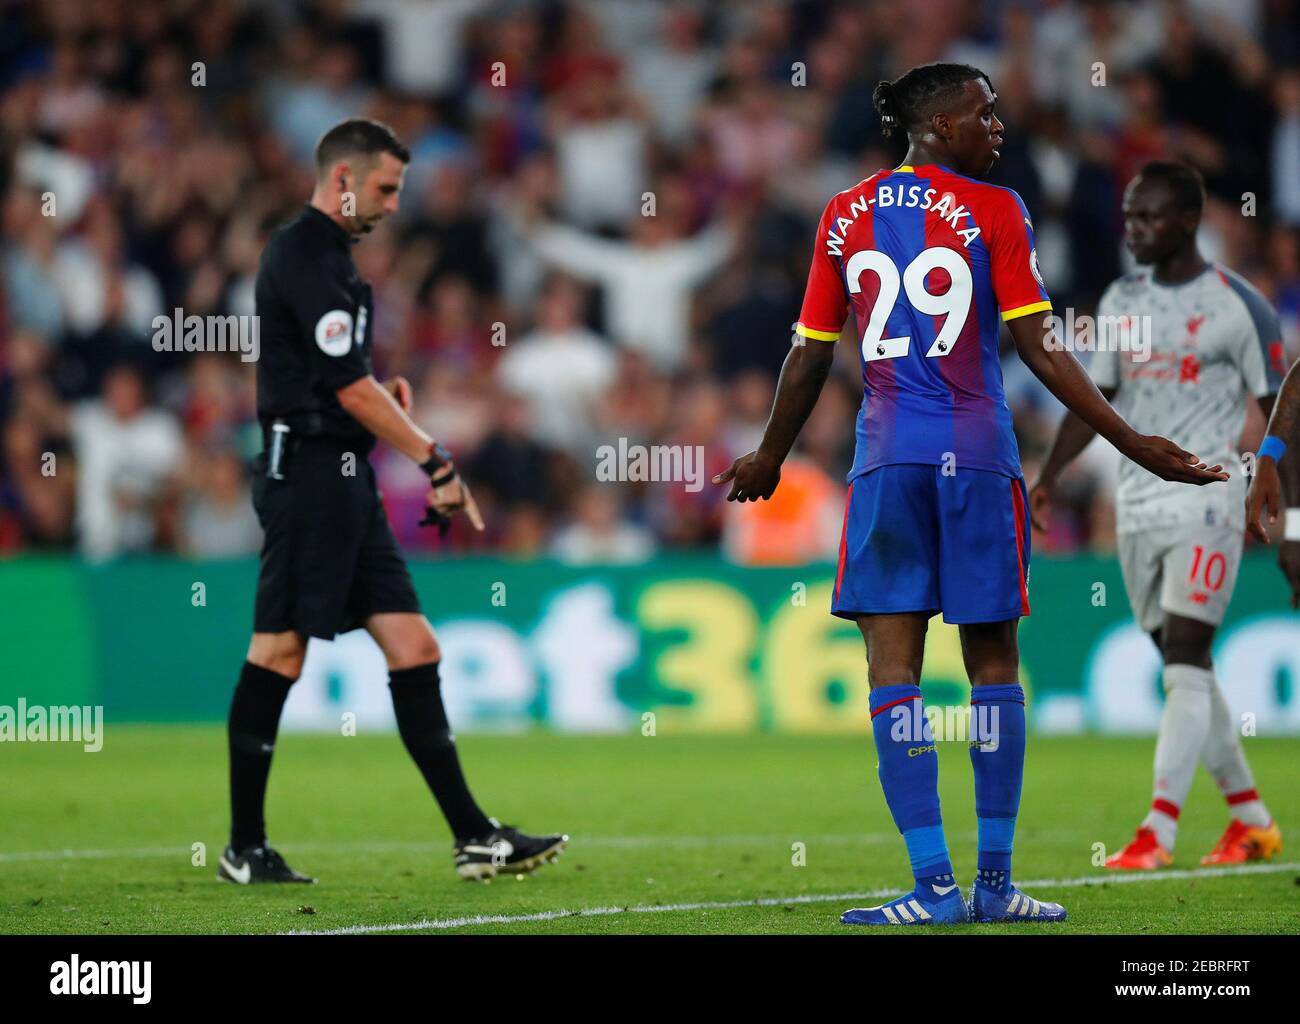 Soccer Football - Premier League - Crystal Palace v Liverpool - Selhurst Park, London, Britain - August 20, 2018  Crystal Palace's Aaron Wan-Bissaka concedes a foul against Liverpool's Mohamed Salah (not pictured) and is subsequently shown a red card by the referee                      REUTERS/Eddie Keogh  EDITORIAL USE ONLY. No use with unauthorized audio, video, data, fixture lists, club/league logos or "live" services. Online in-match use limited to 75 images, no video emulation. No use in betting, games or single club/league/player publications.  Please contact your account representative  Stock Photo